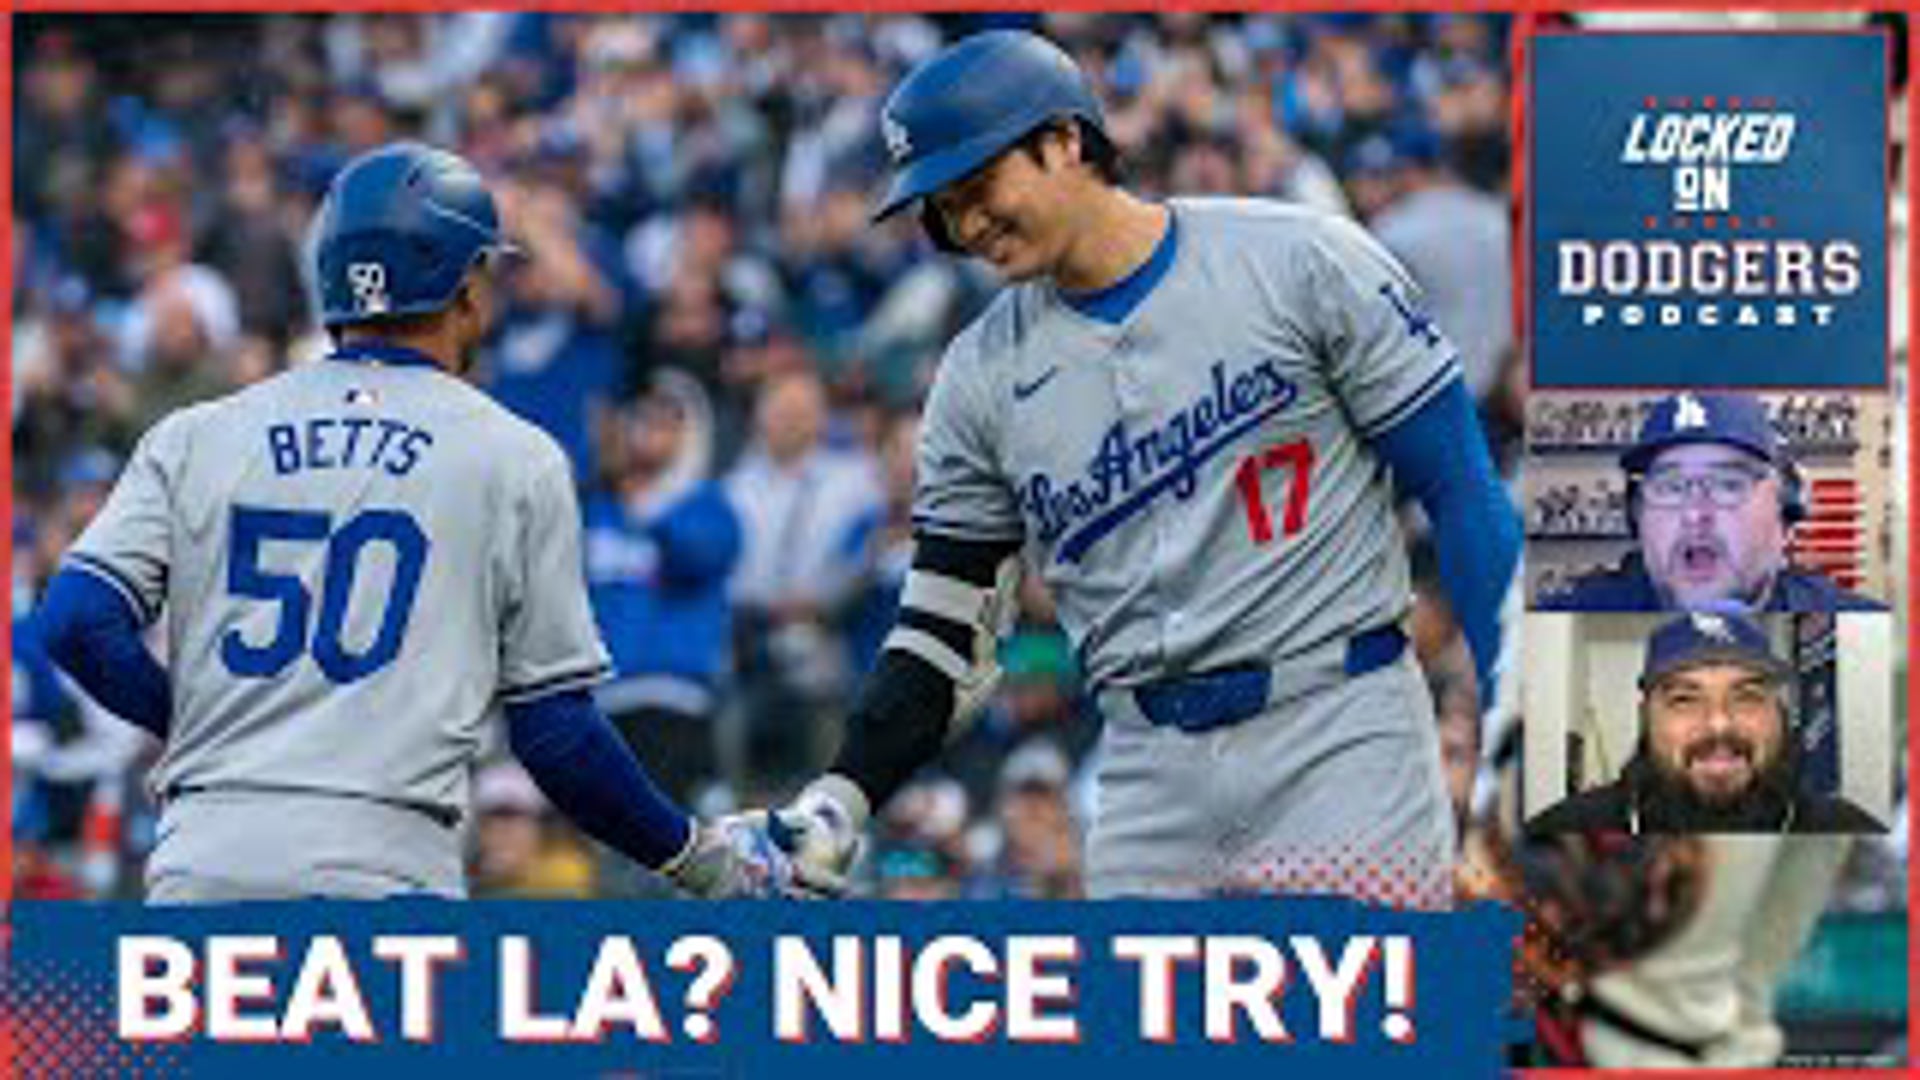 The Los Angeles Dodgers rode some clutch hitting and stellar relief pitching to beat the Giants, 6-4, in 10 innings.